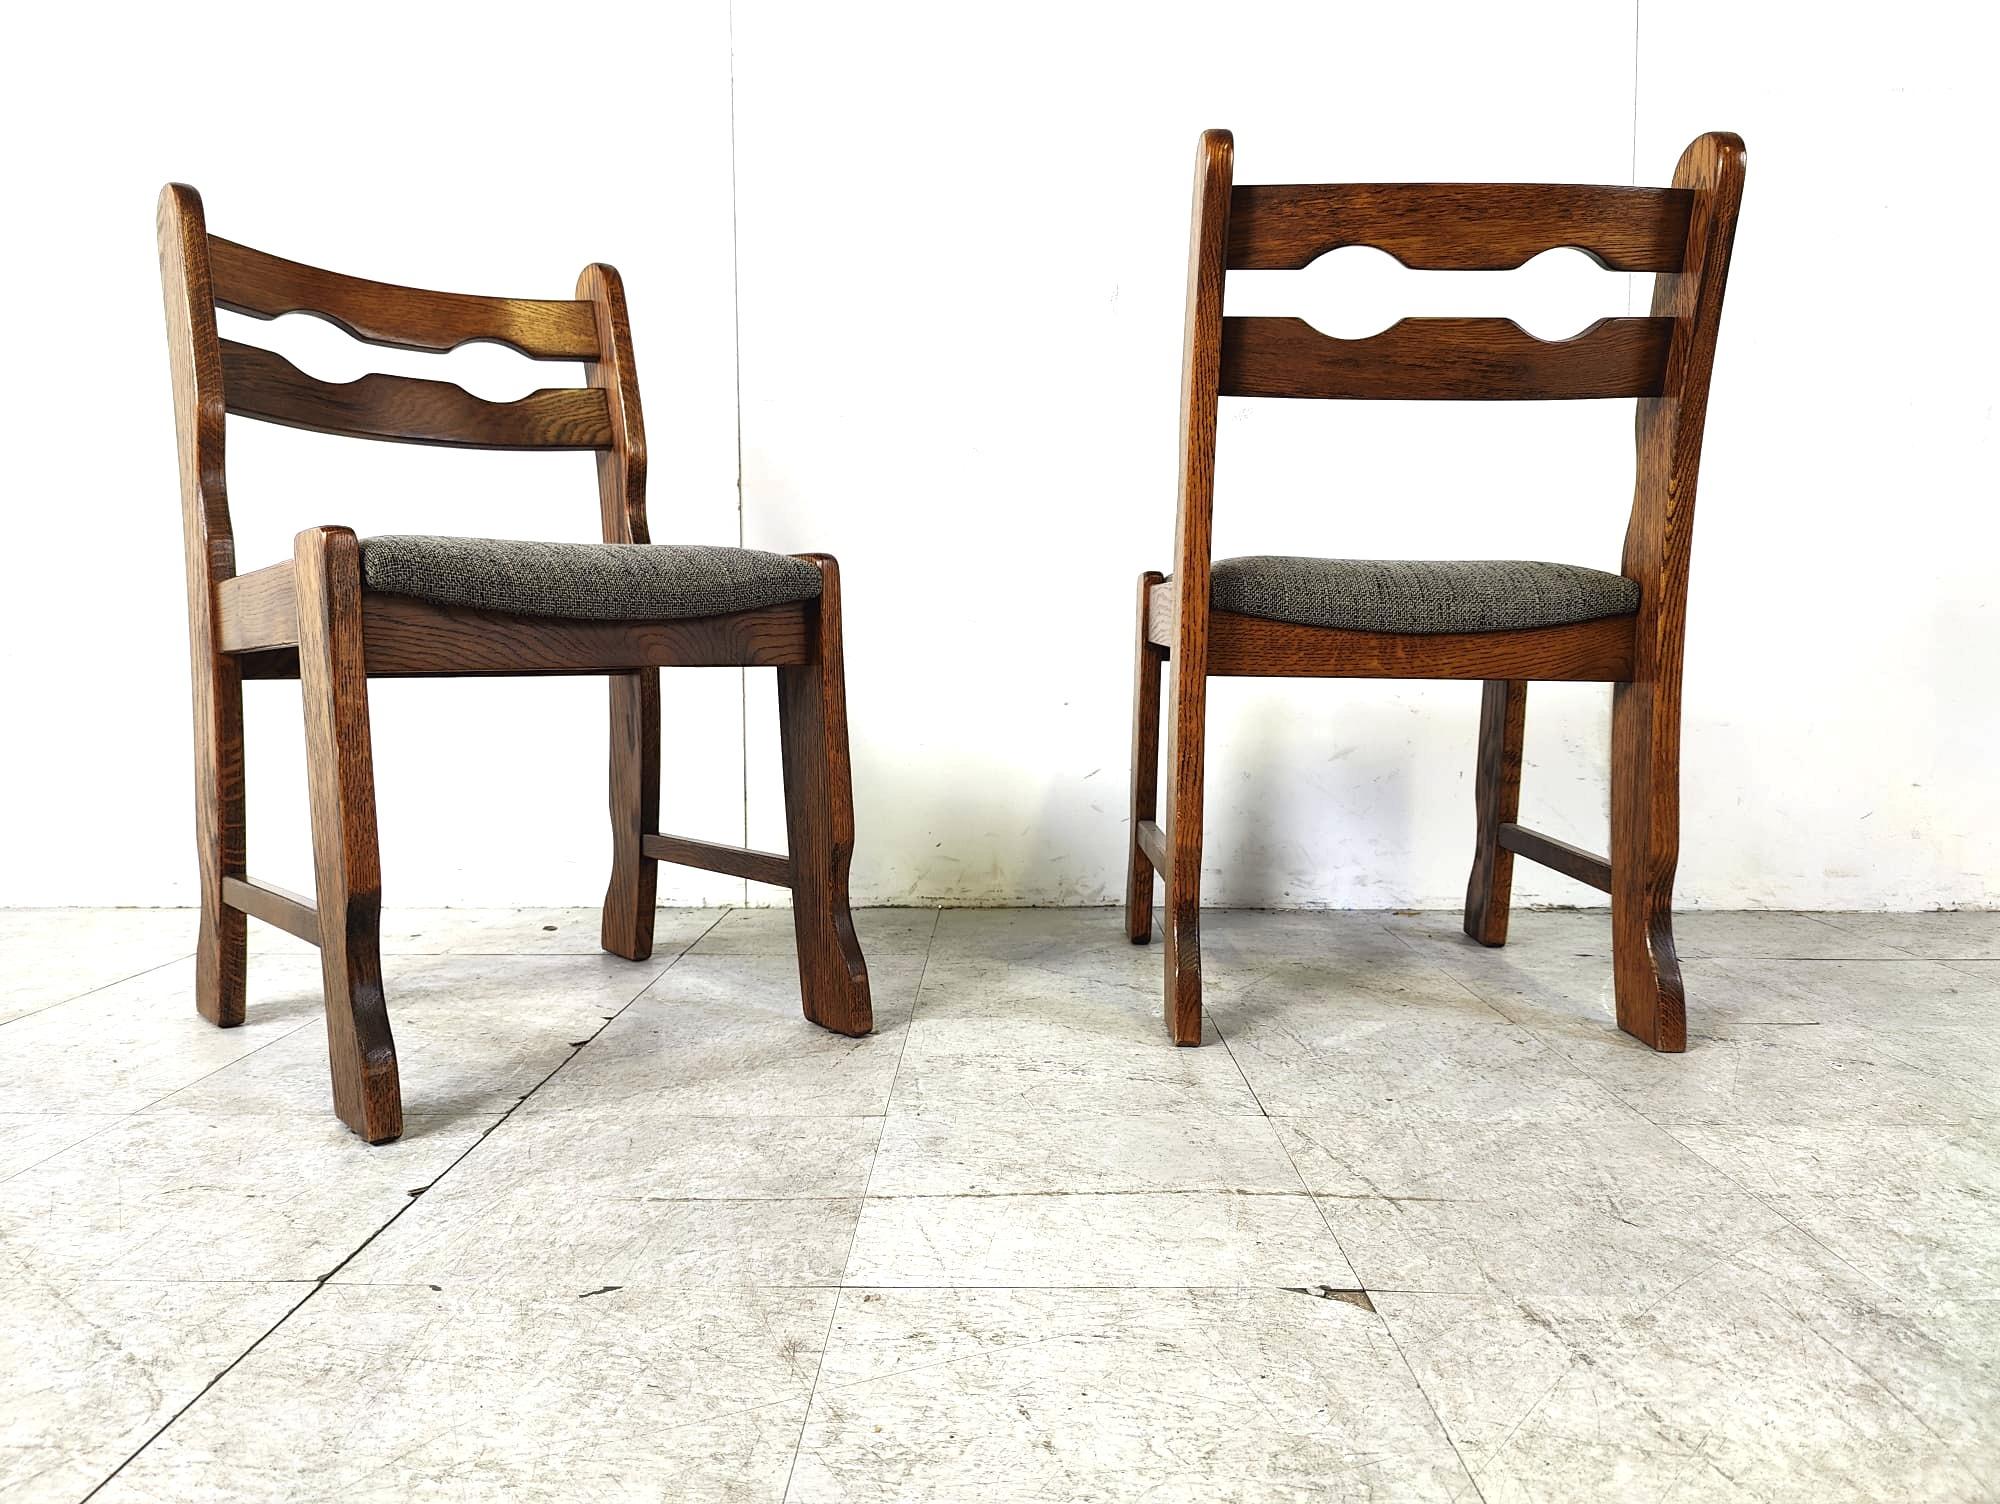 Vintage brutalist dining chairs, set of 6 - 1970s For Sale 3